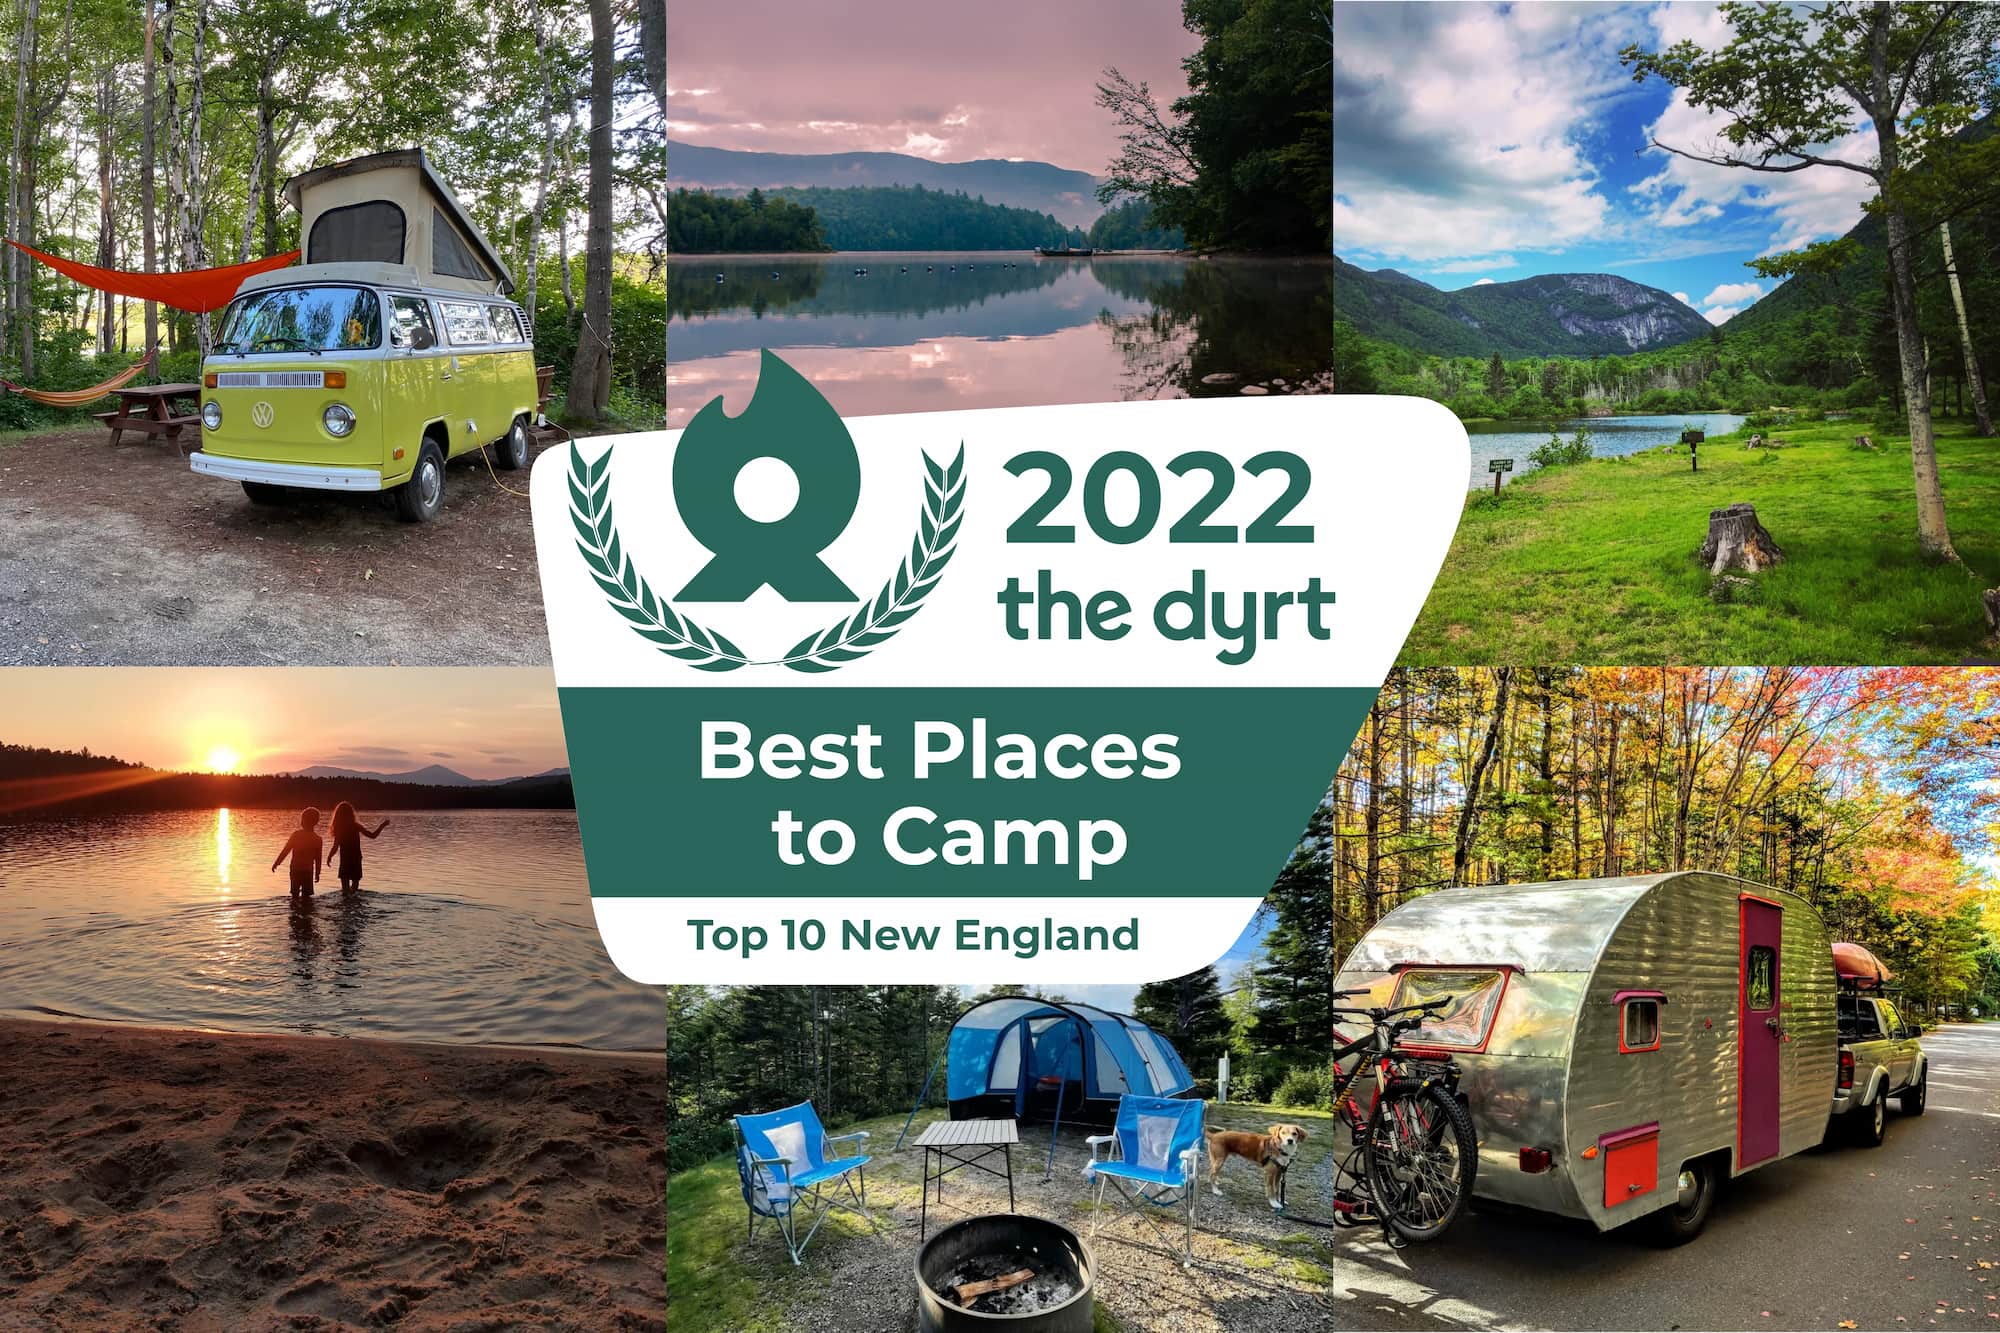 2022 Best Places to Camp: Top 10 in New England